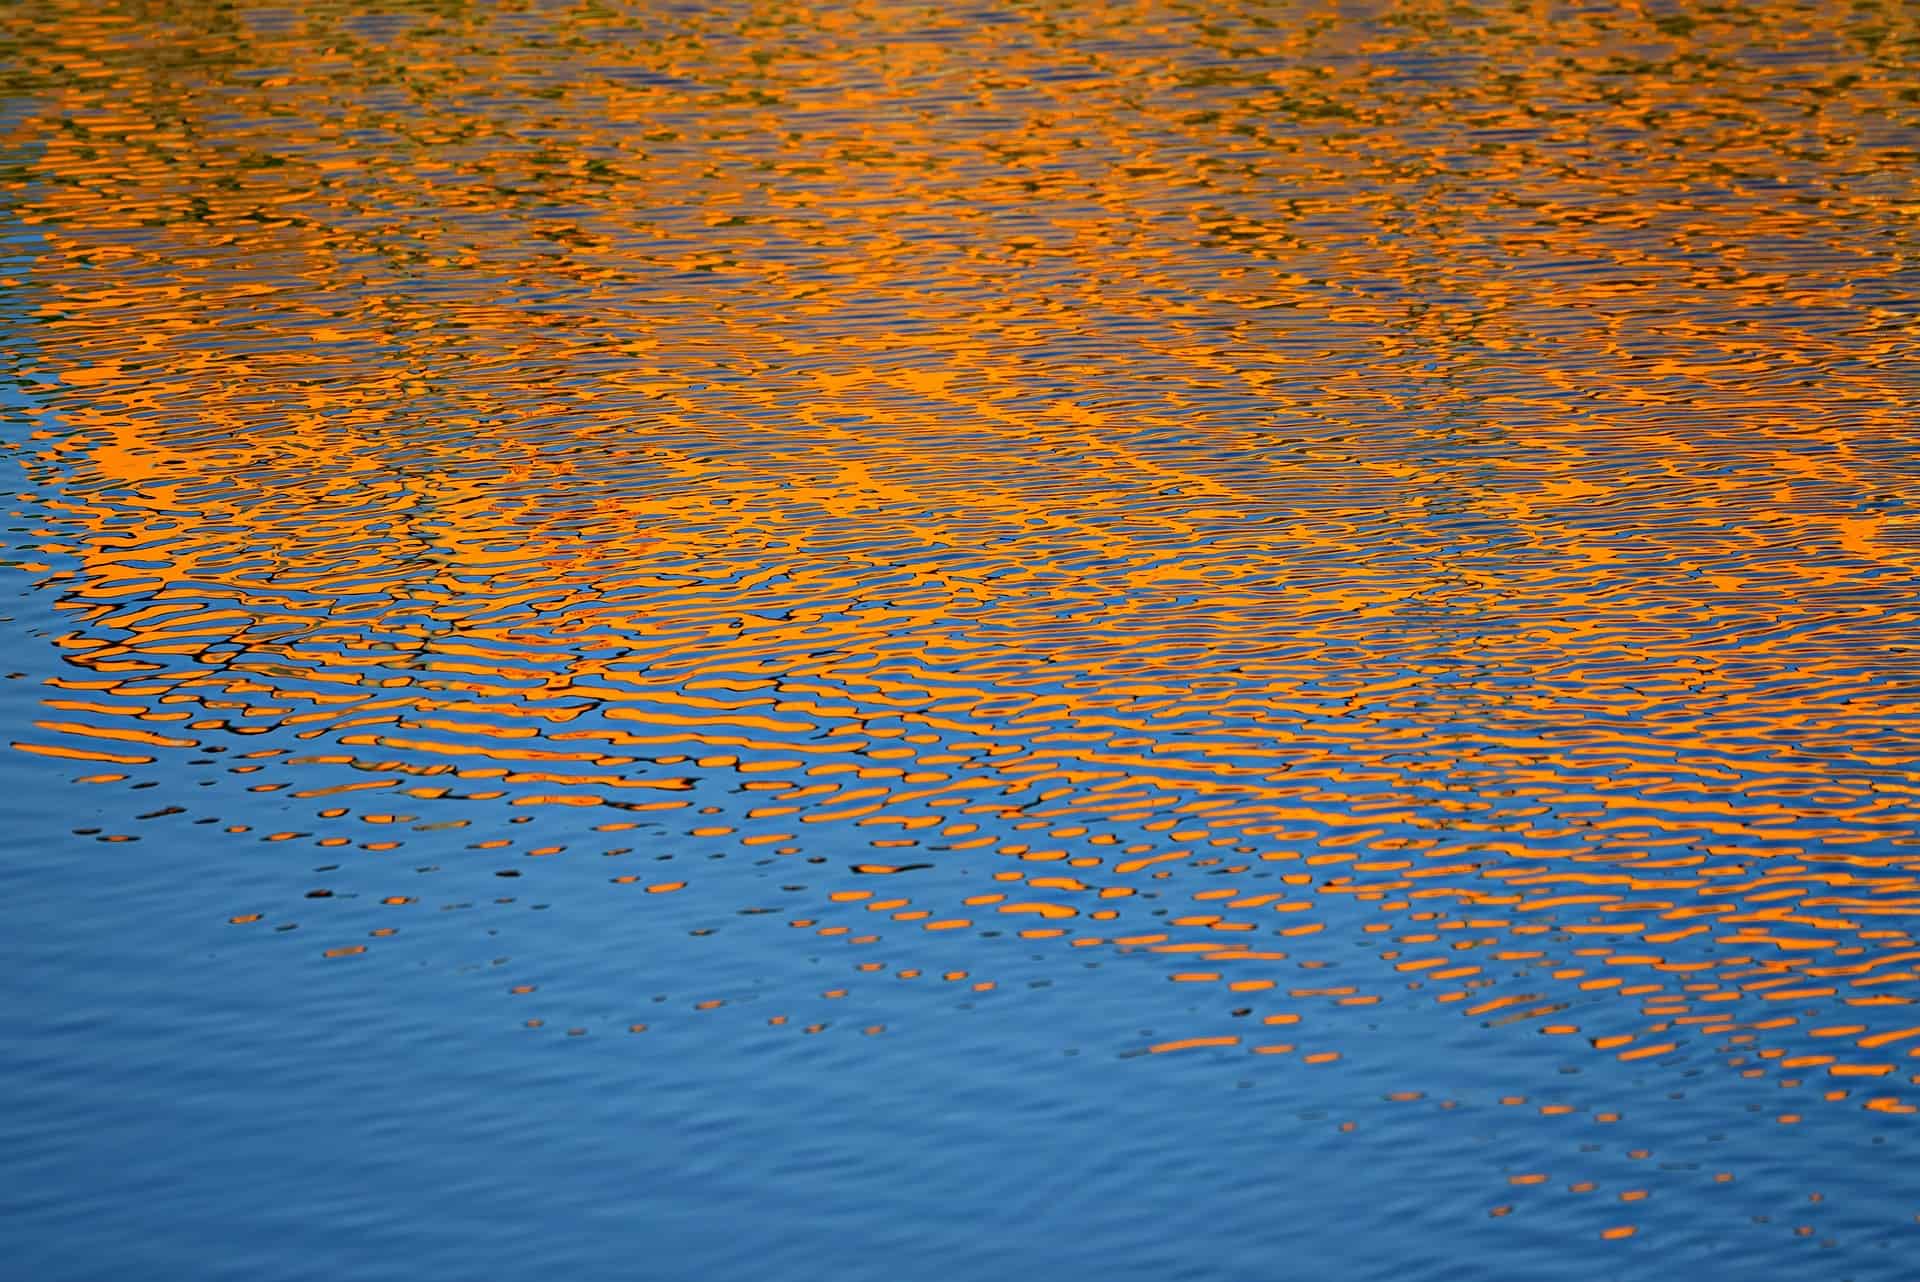 Orange sunset reflected in rippling water.